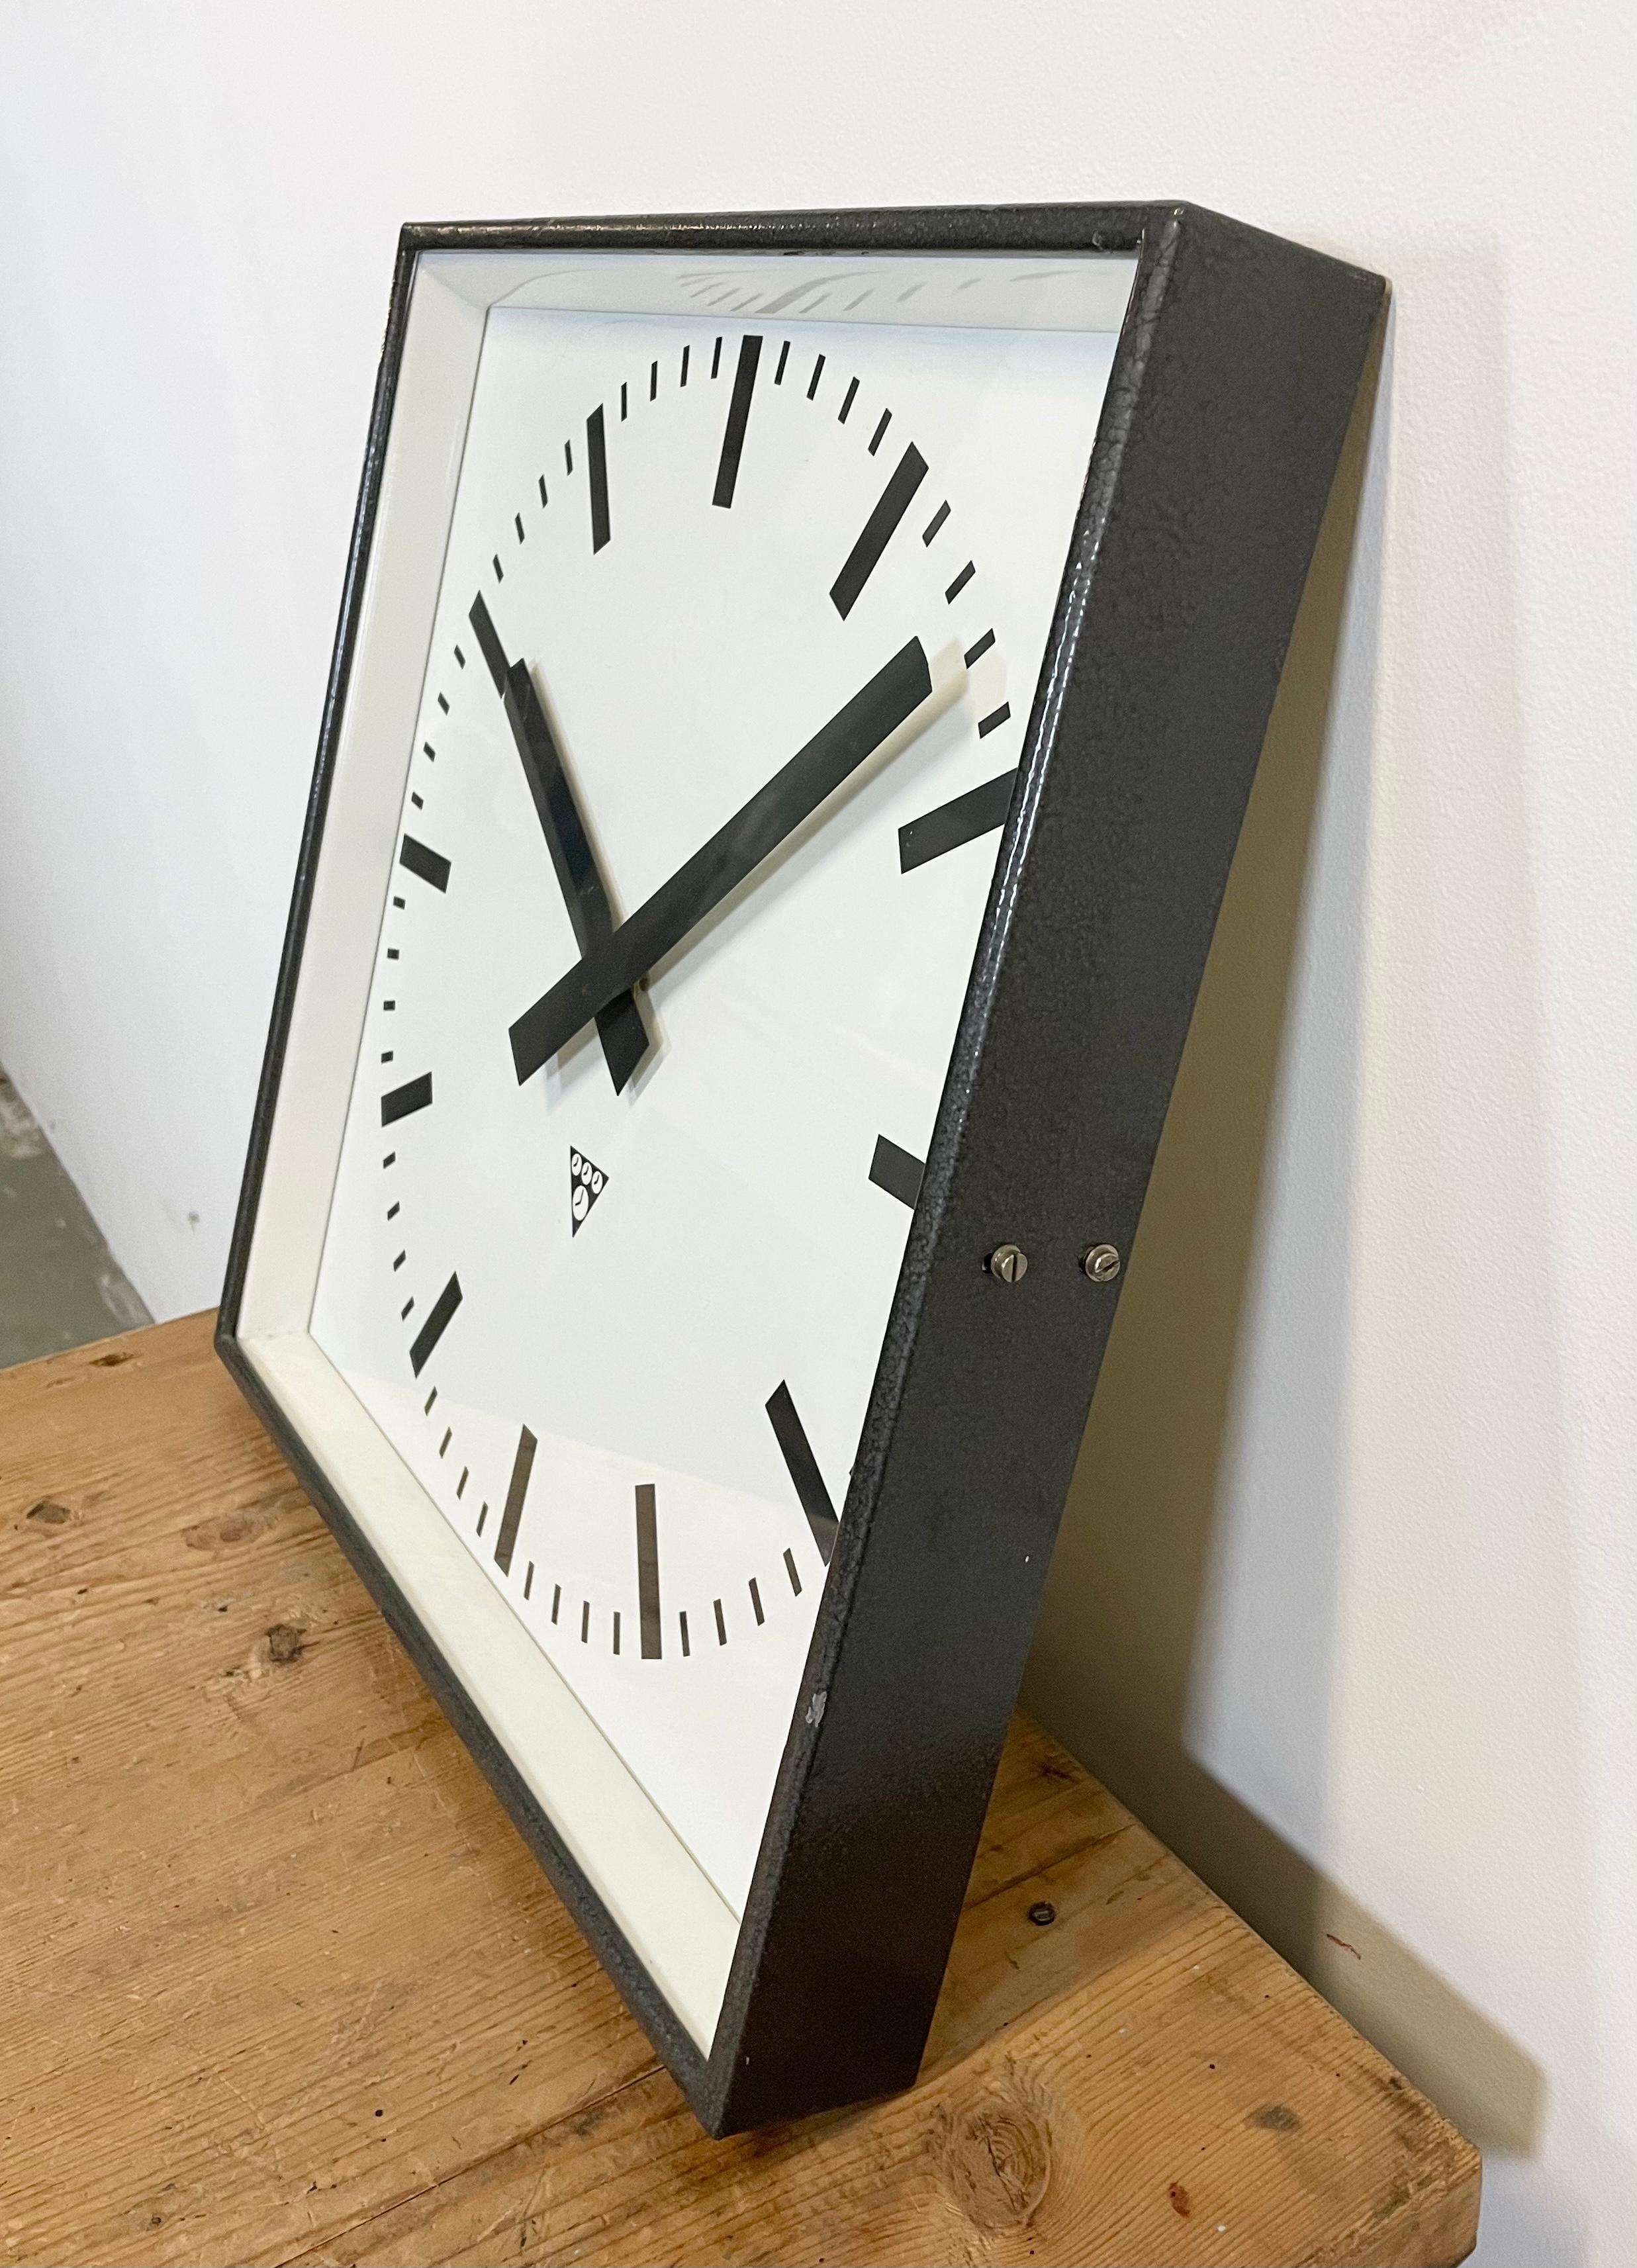 - Clock made by Pragotron in former Czechoslovakia during the 1960s
- Was used in factories, schools & railway stations
- Features a dark gray Hammer paint finish metal body, aluminum dial, clear glass
- Has been converted into a battery-powered